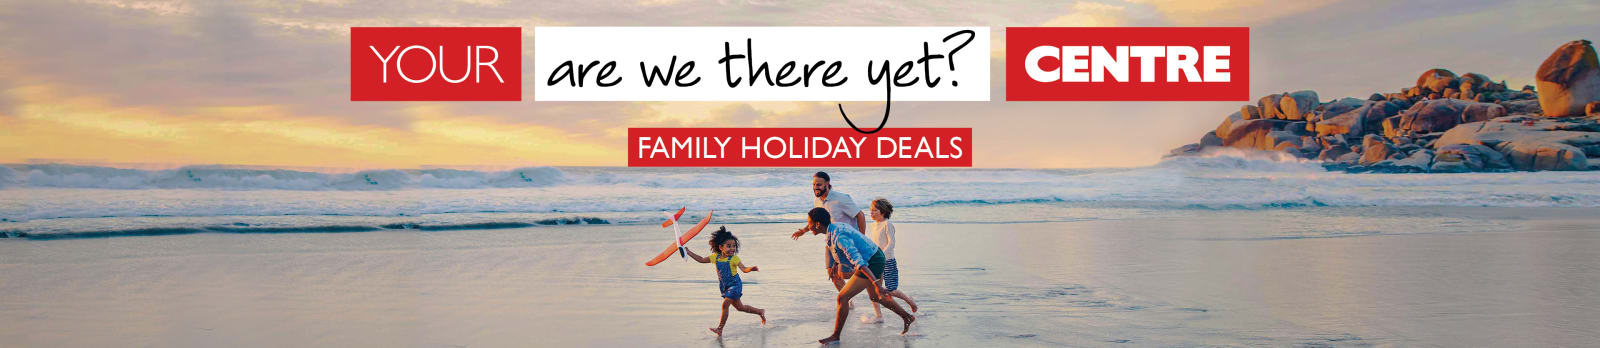 Your are we there yet? Centre | Family holiday deals